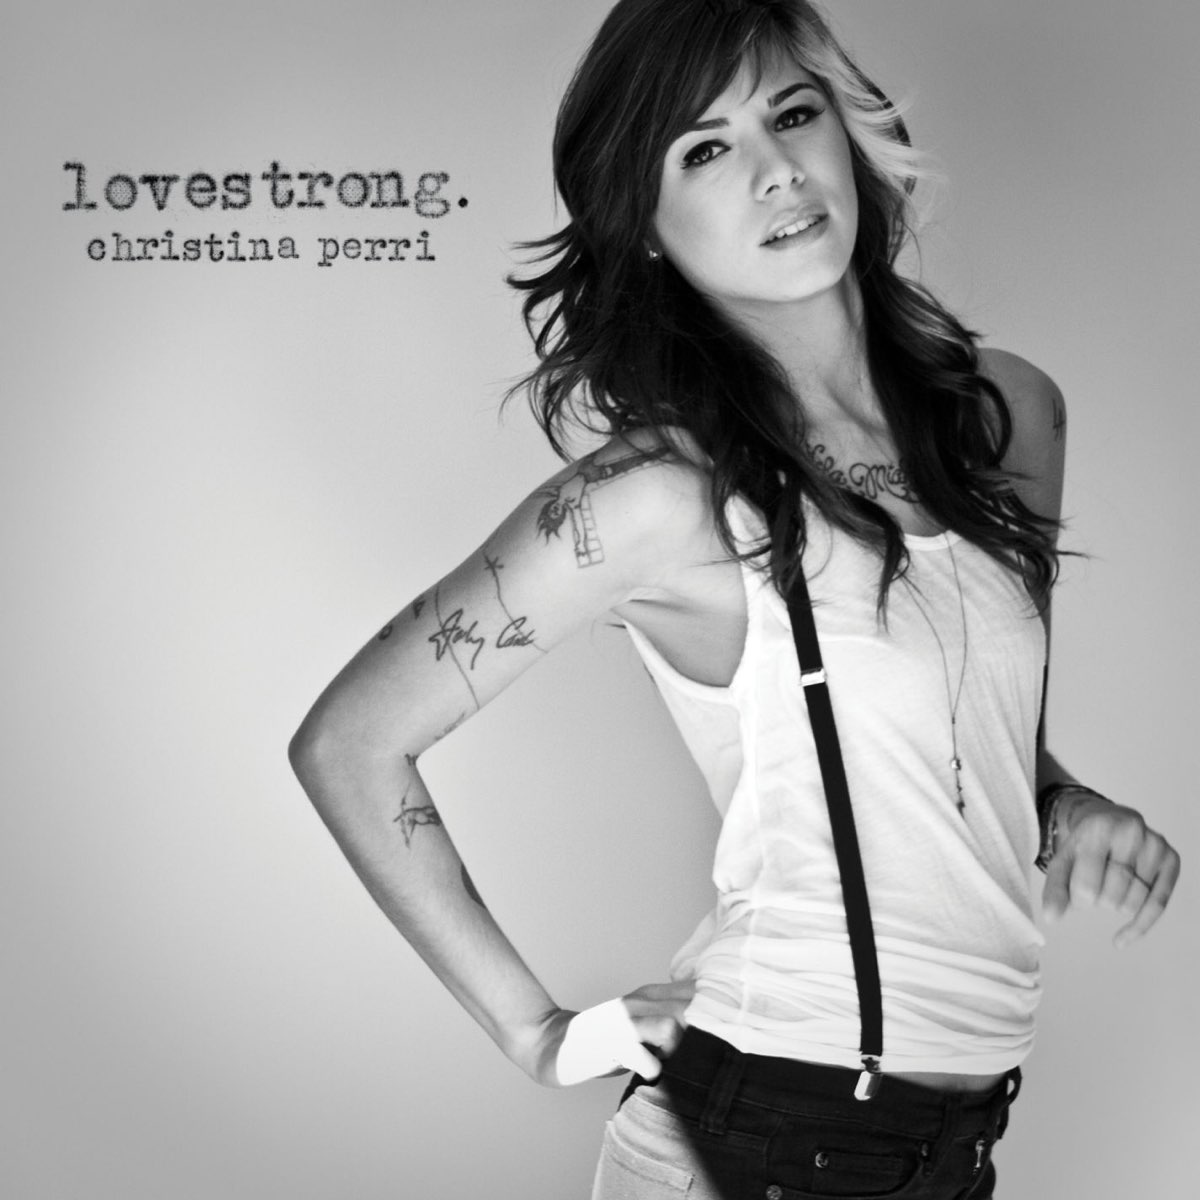 Lovestrong. by Christina Perri on Apple Music